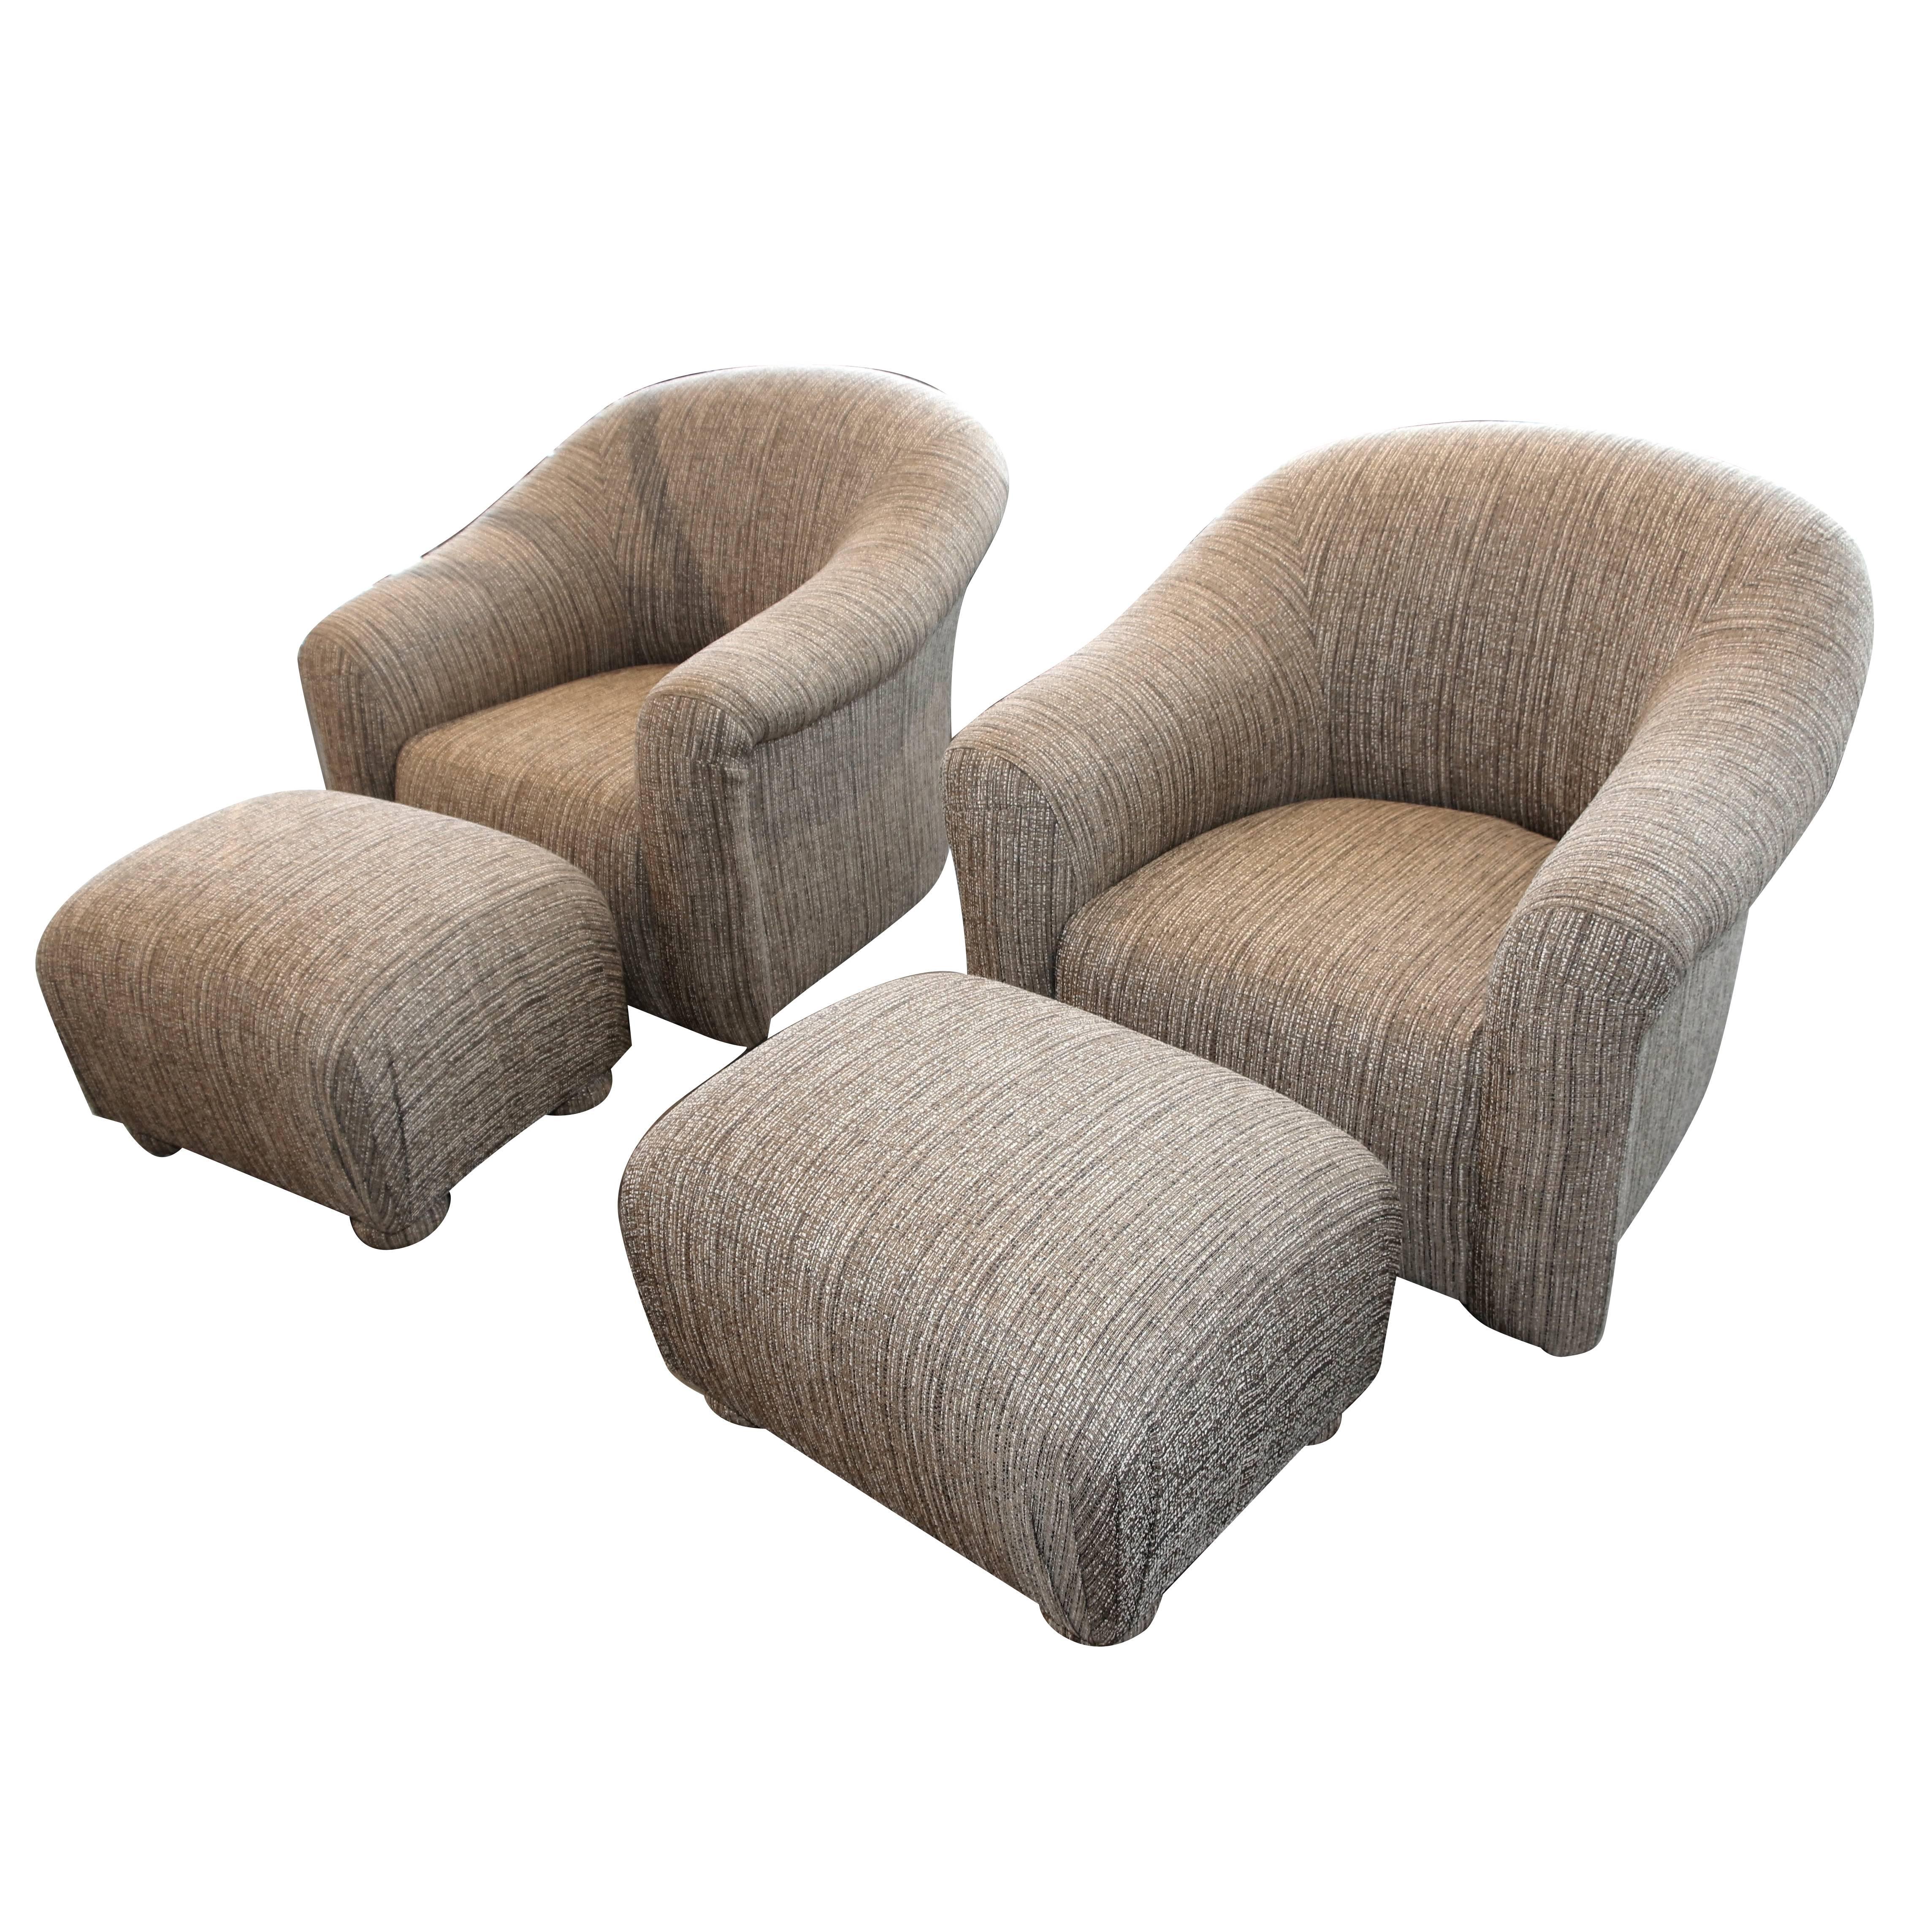 Pair of Comfortable Swivel A. Rudin Chairs and matching ottomans